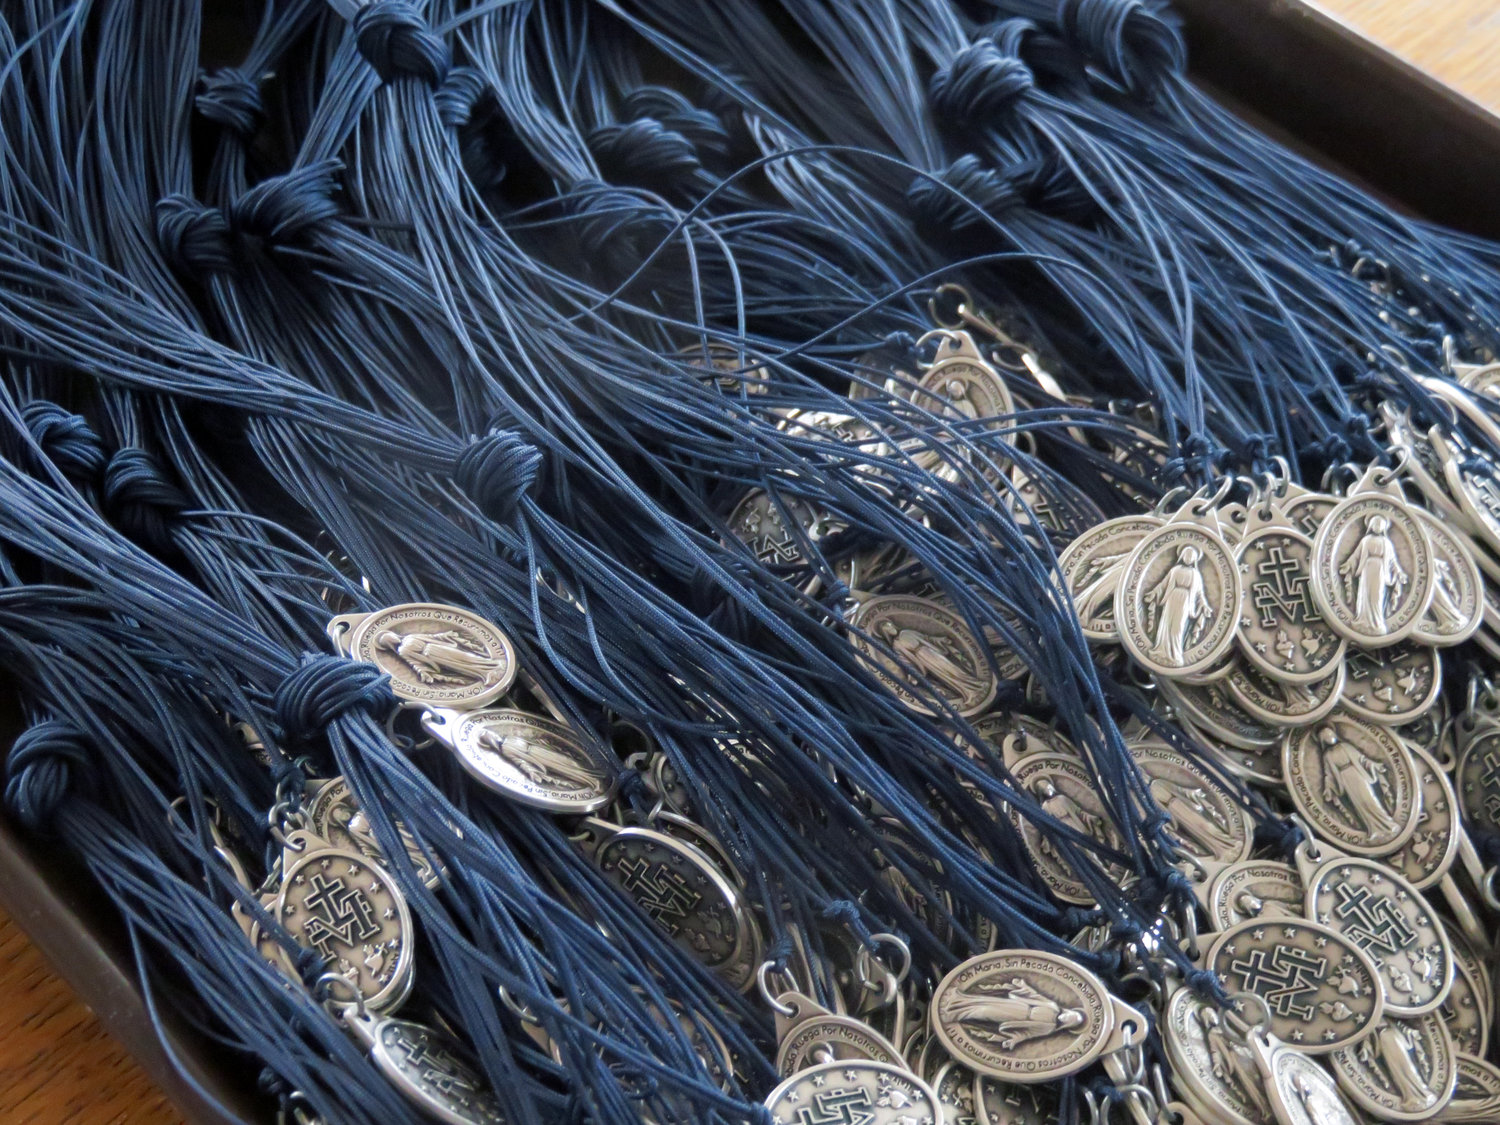 Hundreds of miraculous medals were among the gifts brought to Ethiopia.